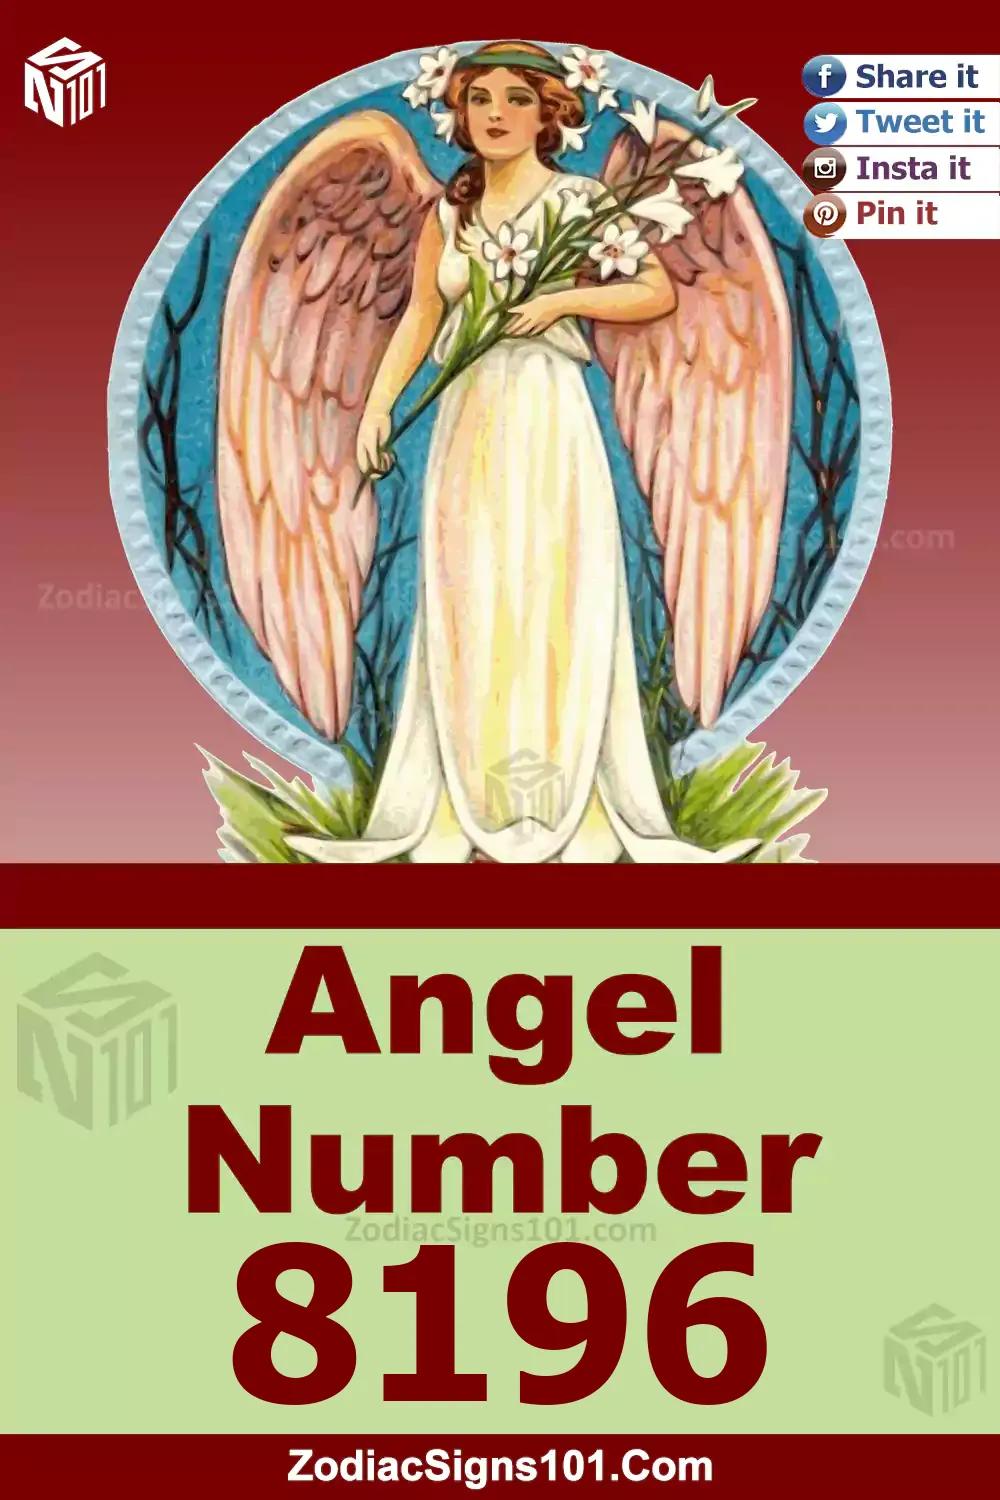 8196 Angel Number Meaning